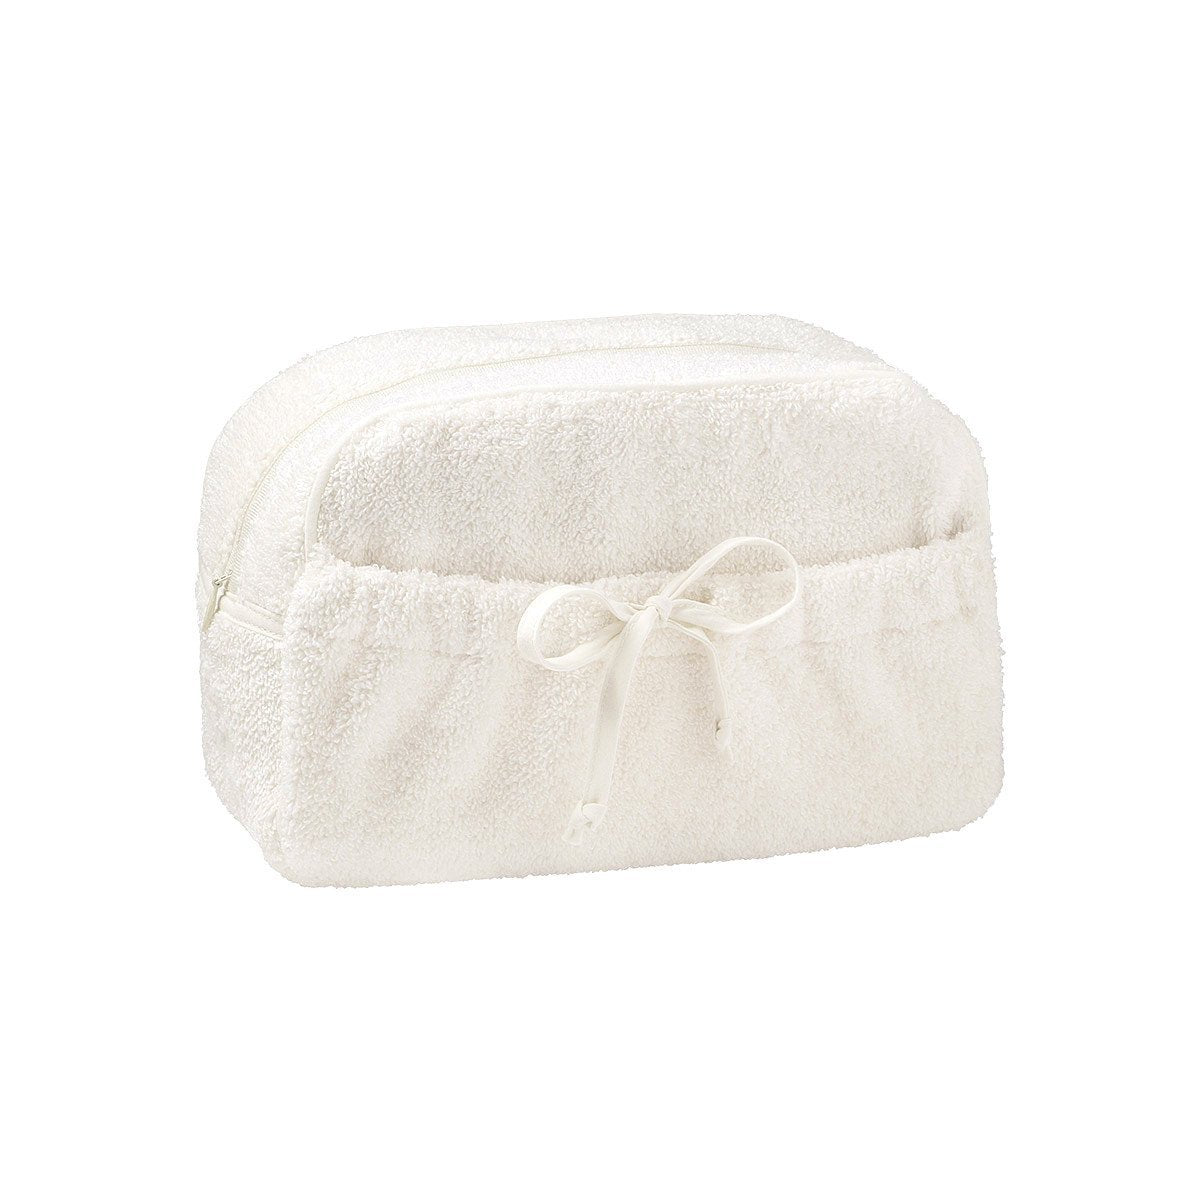 Etoile Nacre Cosmetic Bag by Yves Delorme | Fig Linens - White powder bag, tote